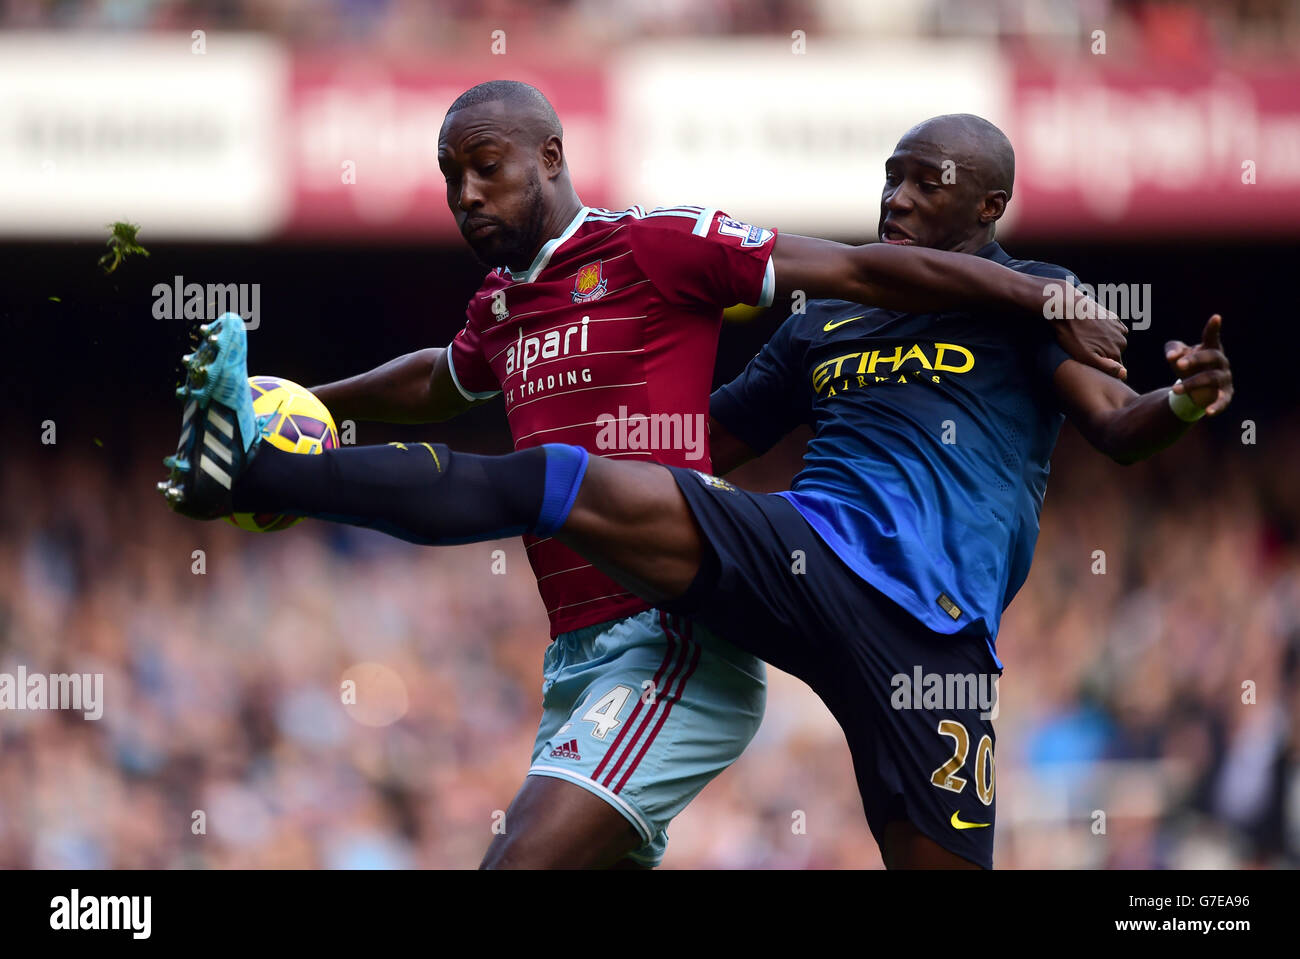 West Ham United's Carlton Cole (left) and Manchester City's Eliaquim Mangala (right) battle for the ball in the air Stock Photo